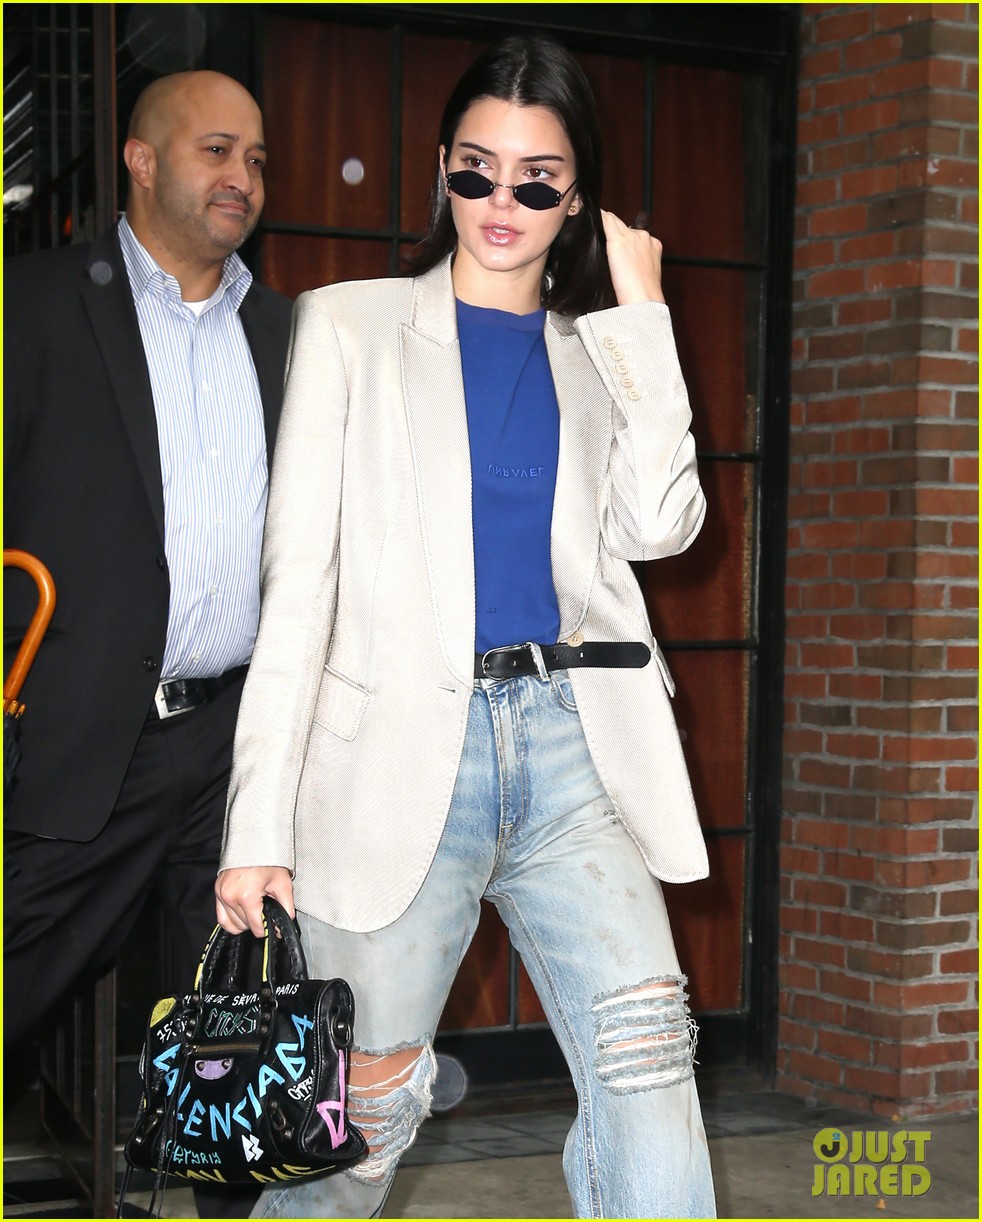 Kendall Jenner Sports a Stylish Blazer While Stepping Out in NYC ...